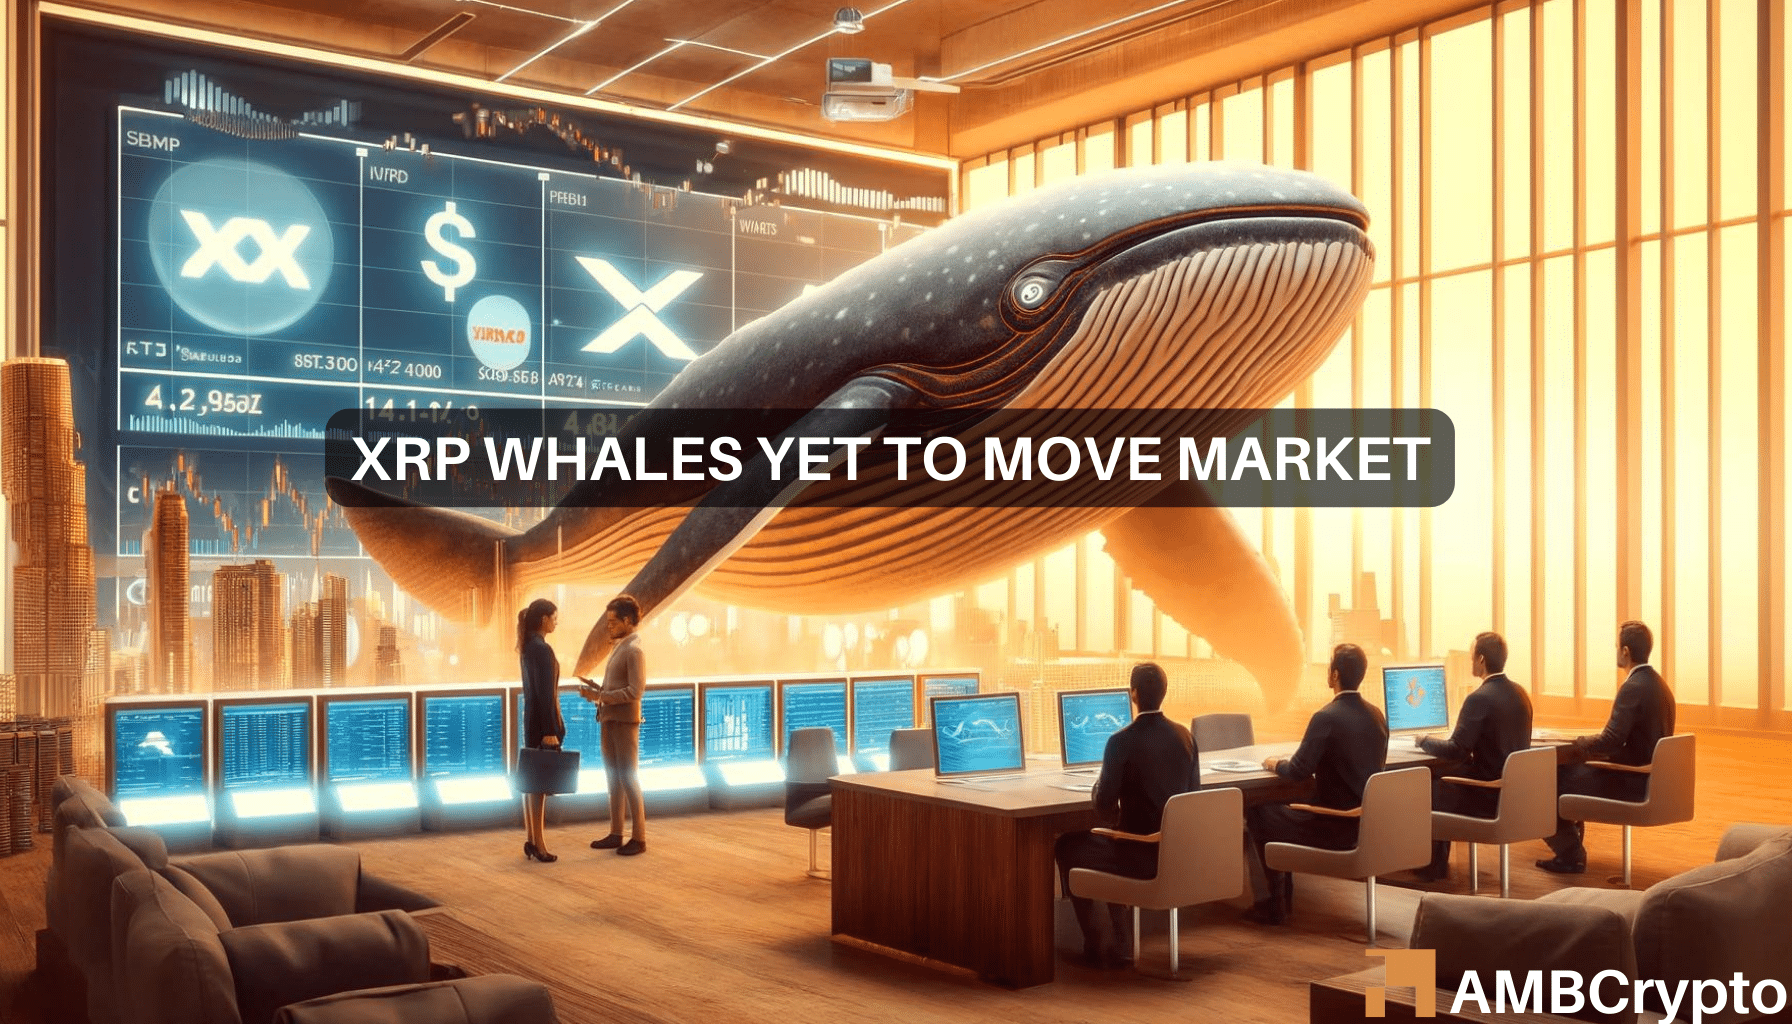 XRP whales add $55 million, but the price falls again – What’s happening?